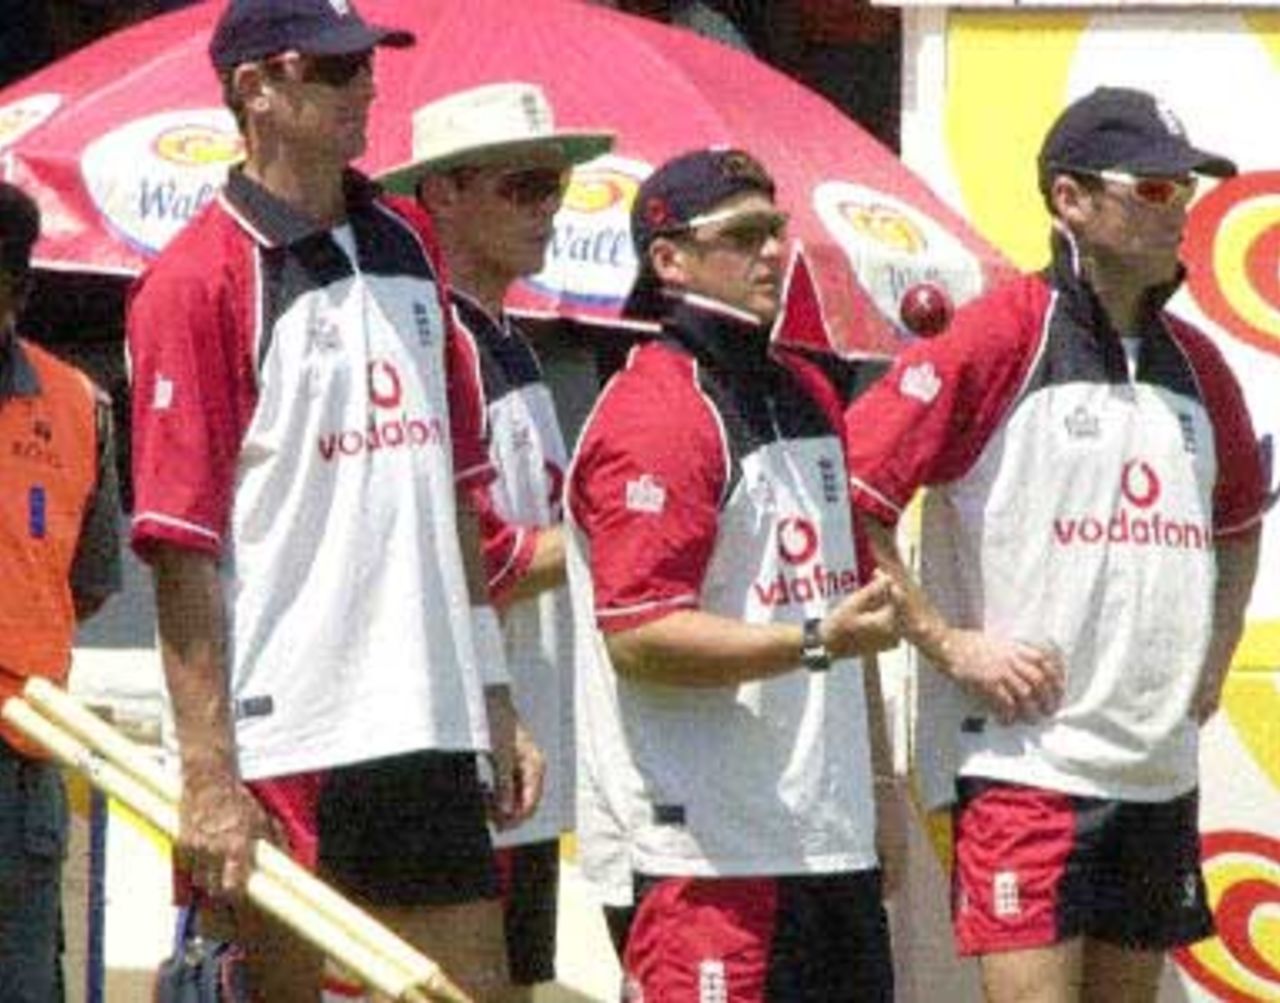 English fast bowler Darren Gough (C) flanked by teammates Andrew Caddick (R) and Craig White (L) and another unidentified player watches batting practice 05 February 2001 in the first day of the first practice match against a Sri Lankan board president's eleven. England are due to play three tests and three one-day internationals against the home team in their first tour of Sri Lanka in eight years.